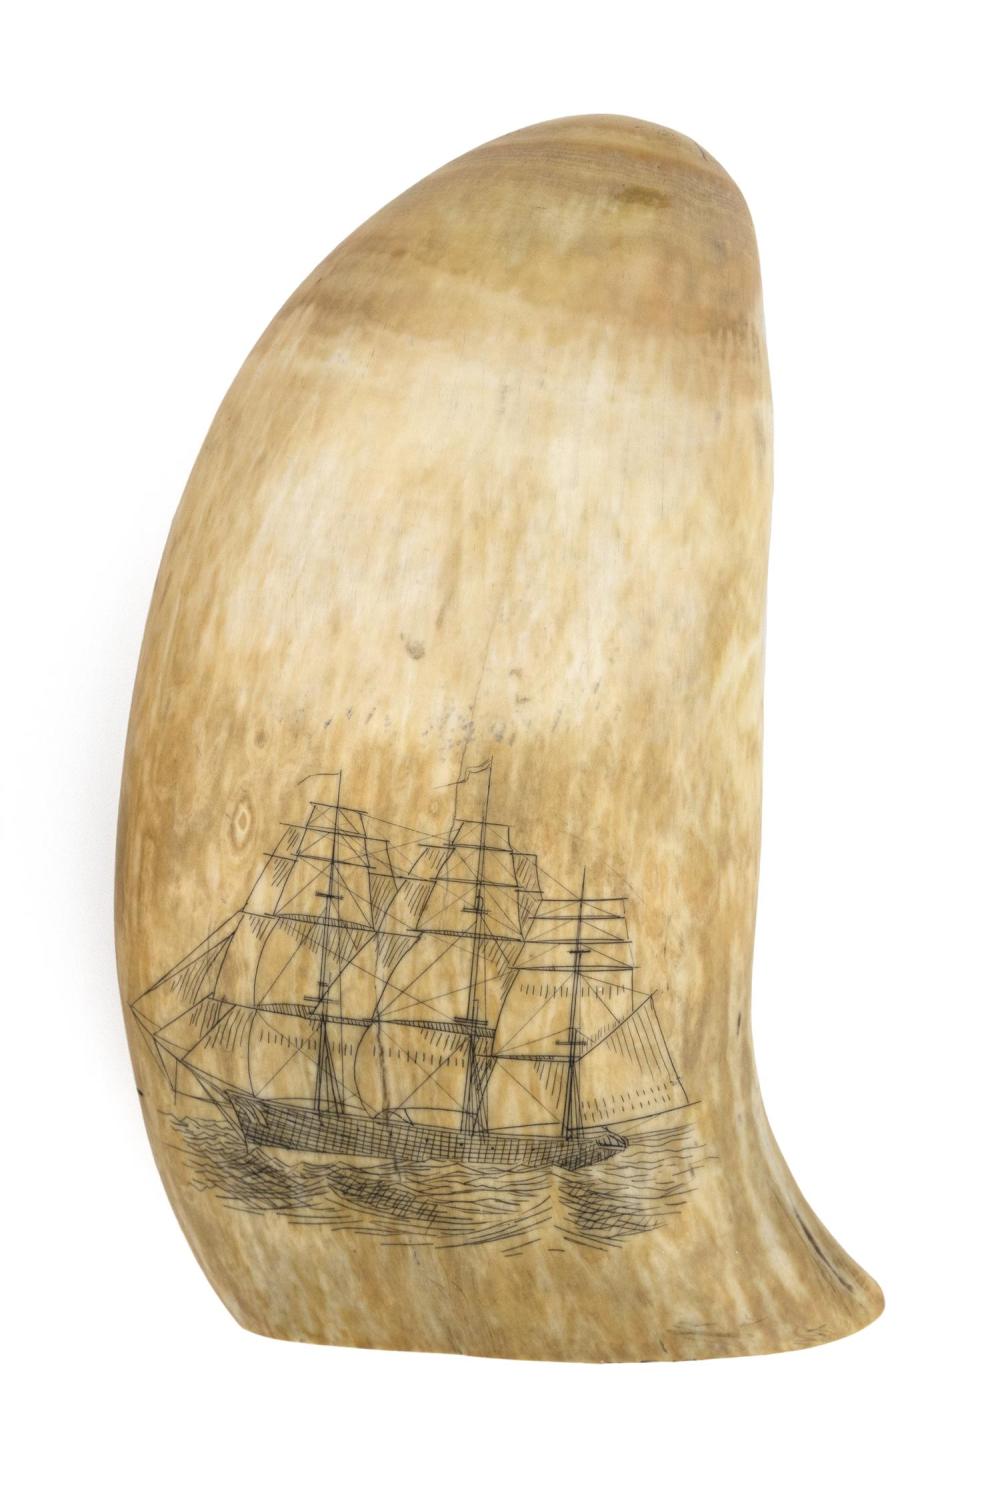 SCRIMSHAW WHALE'S TOOTH WITH SHIP